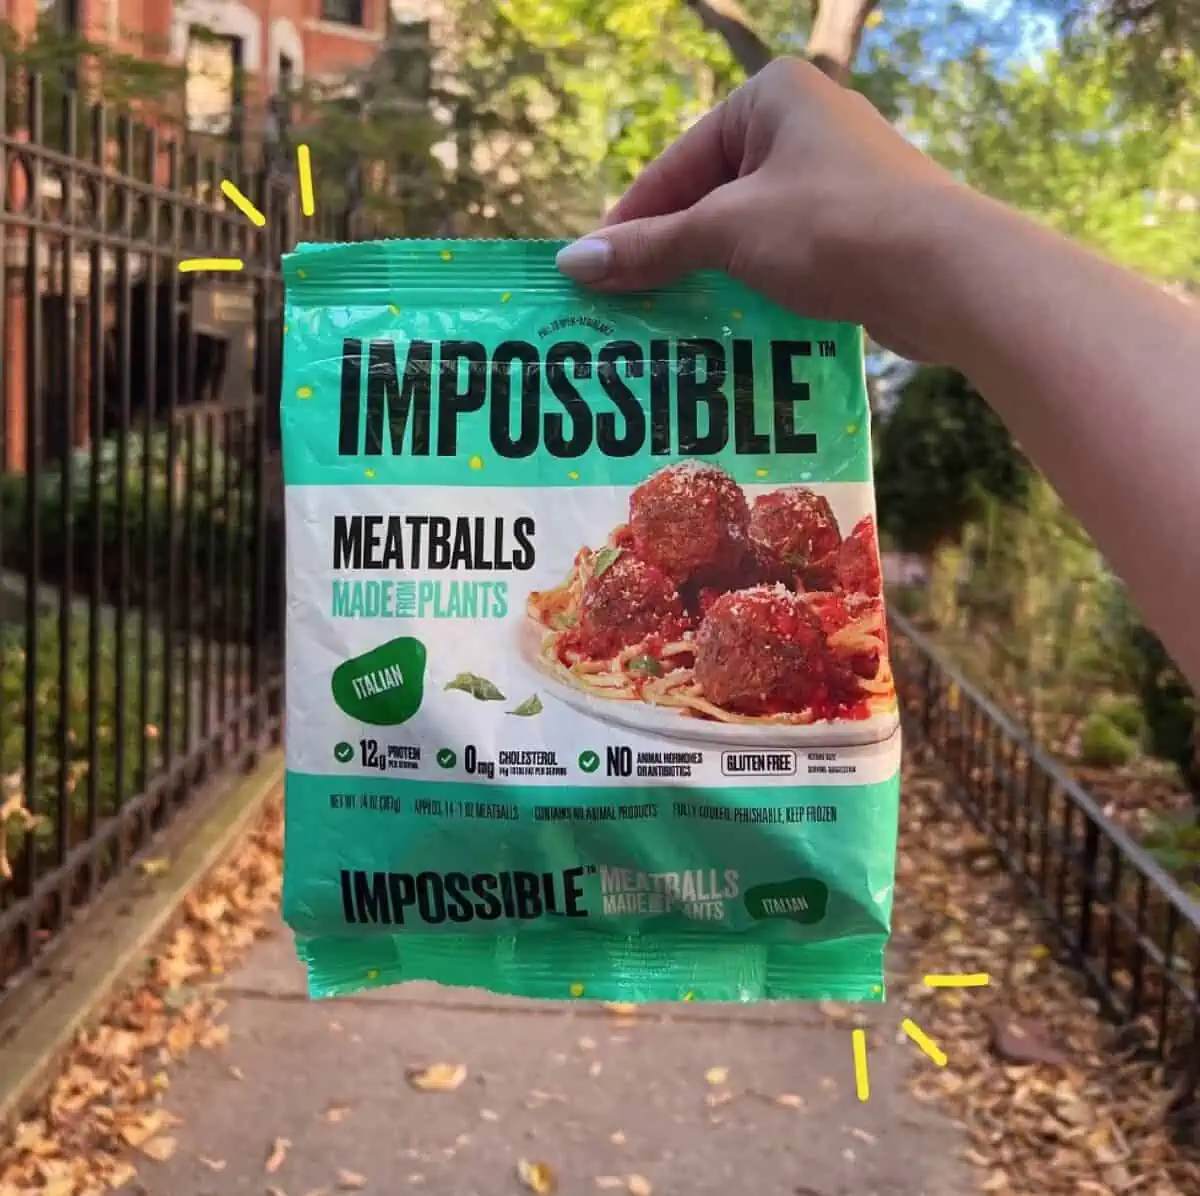 A hand holding a green and white bag of Impossible Meatballs on a city street with leaves on the ground.